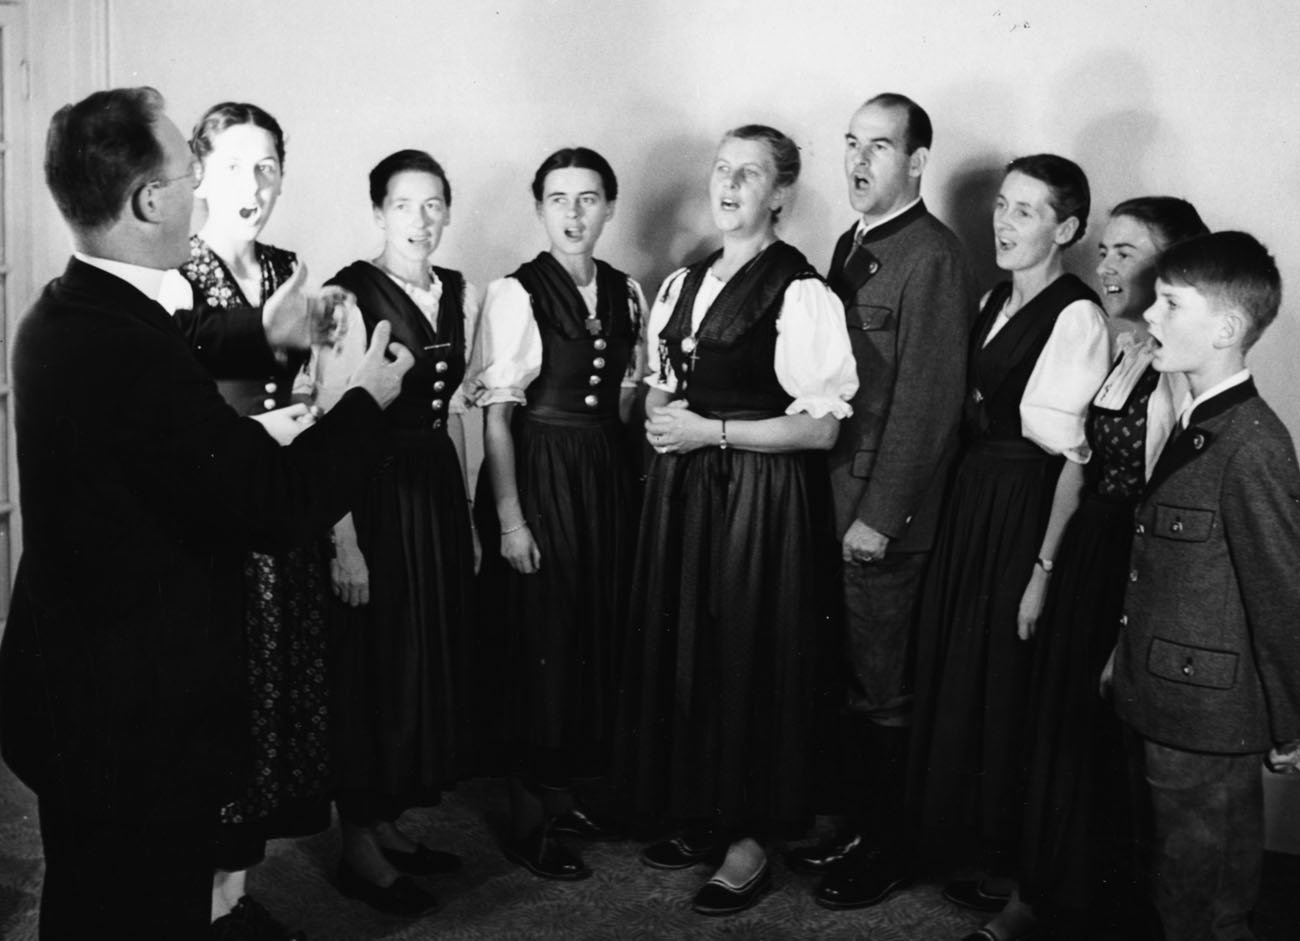 The real von Trapp family in 1950